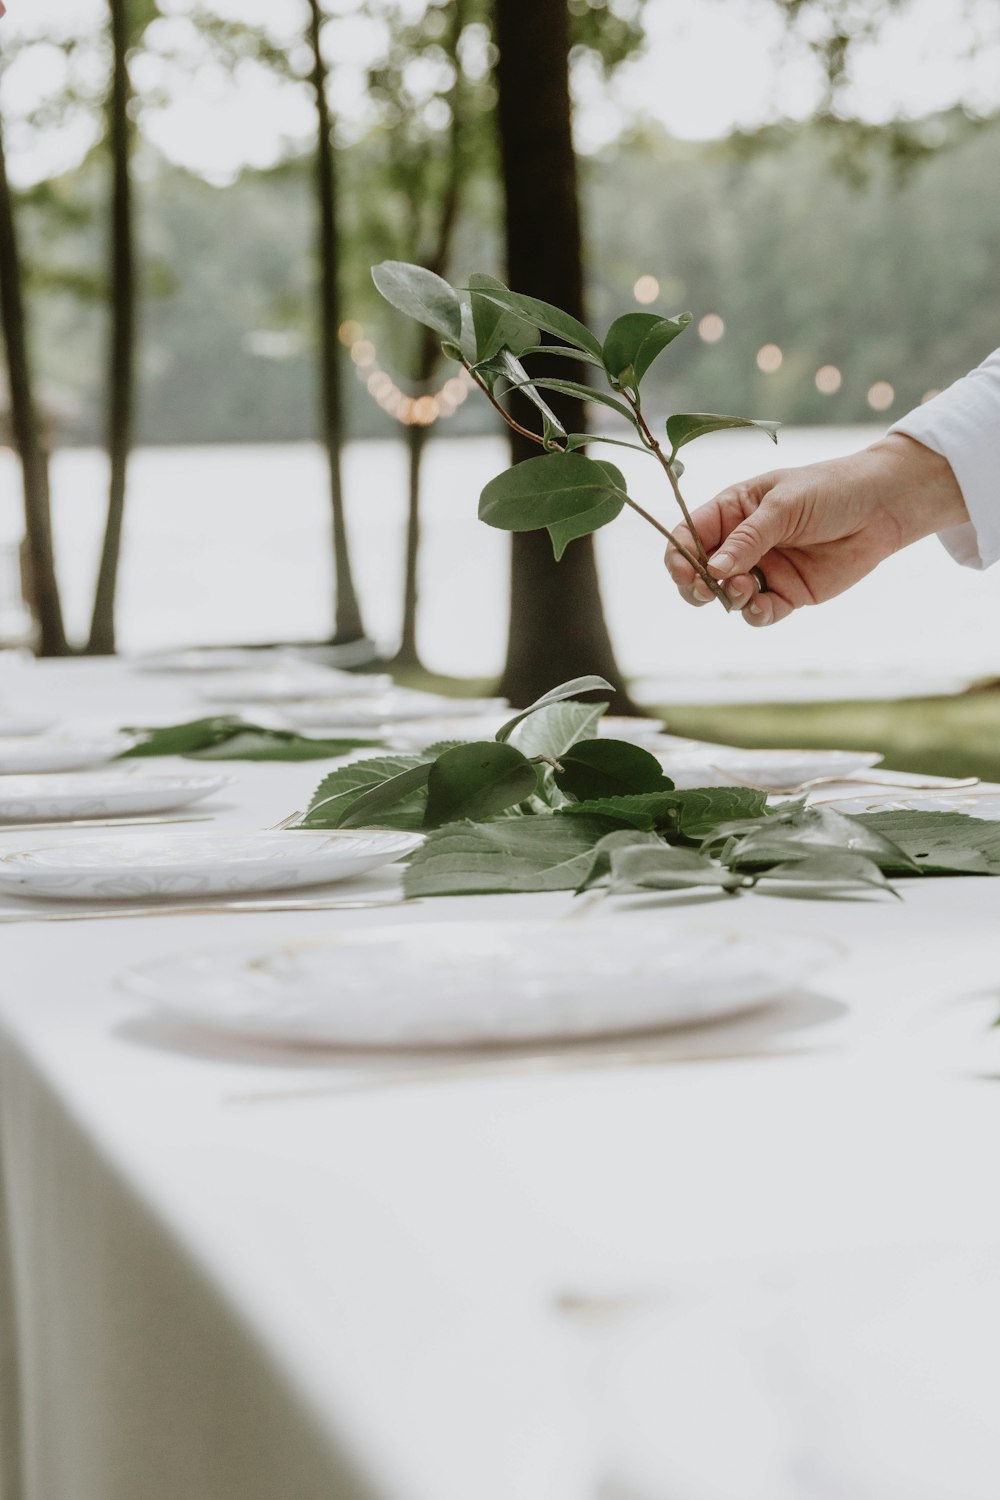 person holding green plant on white ceramic plate